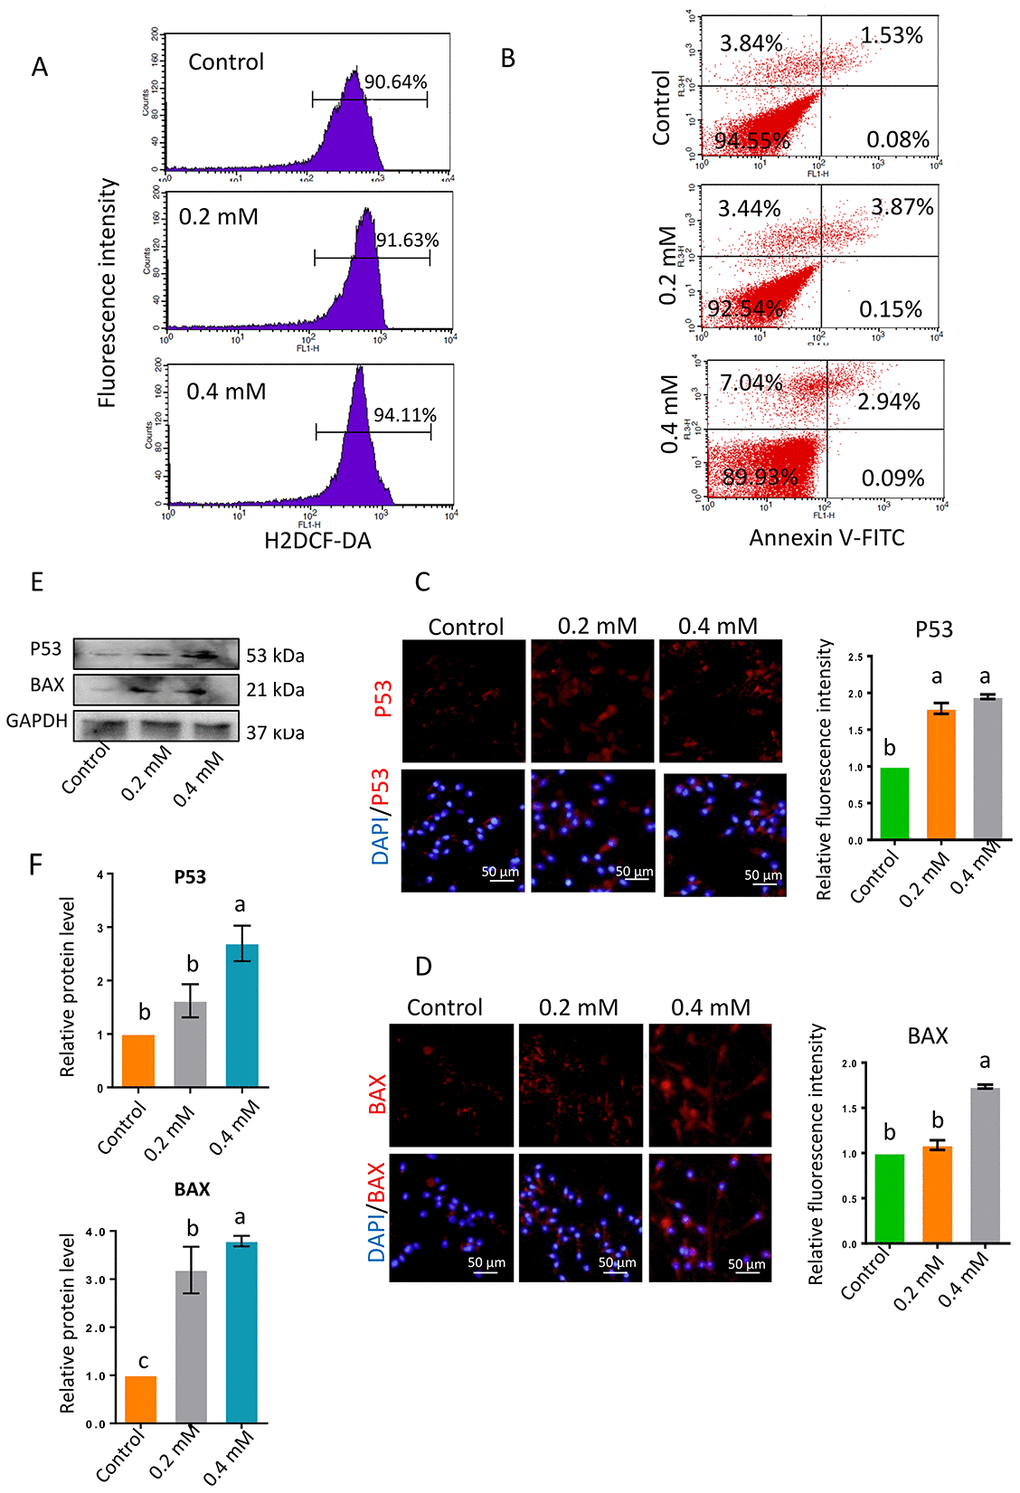 (A) ROS levels in sperm determined by flow cytometry with DCFH-DA after 1-h gibberellin treatment. (B) Spermatozoon plasma membrane phosphatidylserine externalization, determined by flow cytometry with an Annexin V-FITC apoptosis detection kit. (C–D) The relative protein levels of the apoptotic markers BAX and P53 in sperm were detected by immunocytochemistry and quantified based on the relative fluorescence intensity. (E–F) The relative protein levels of BAX and P53 in sperm were detected by Western blotting. The results are presented as the mean ± SEM.